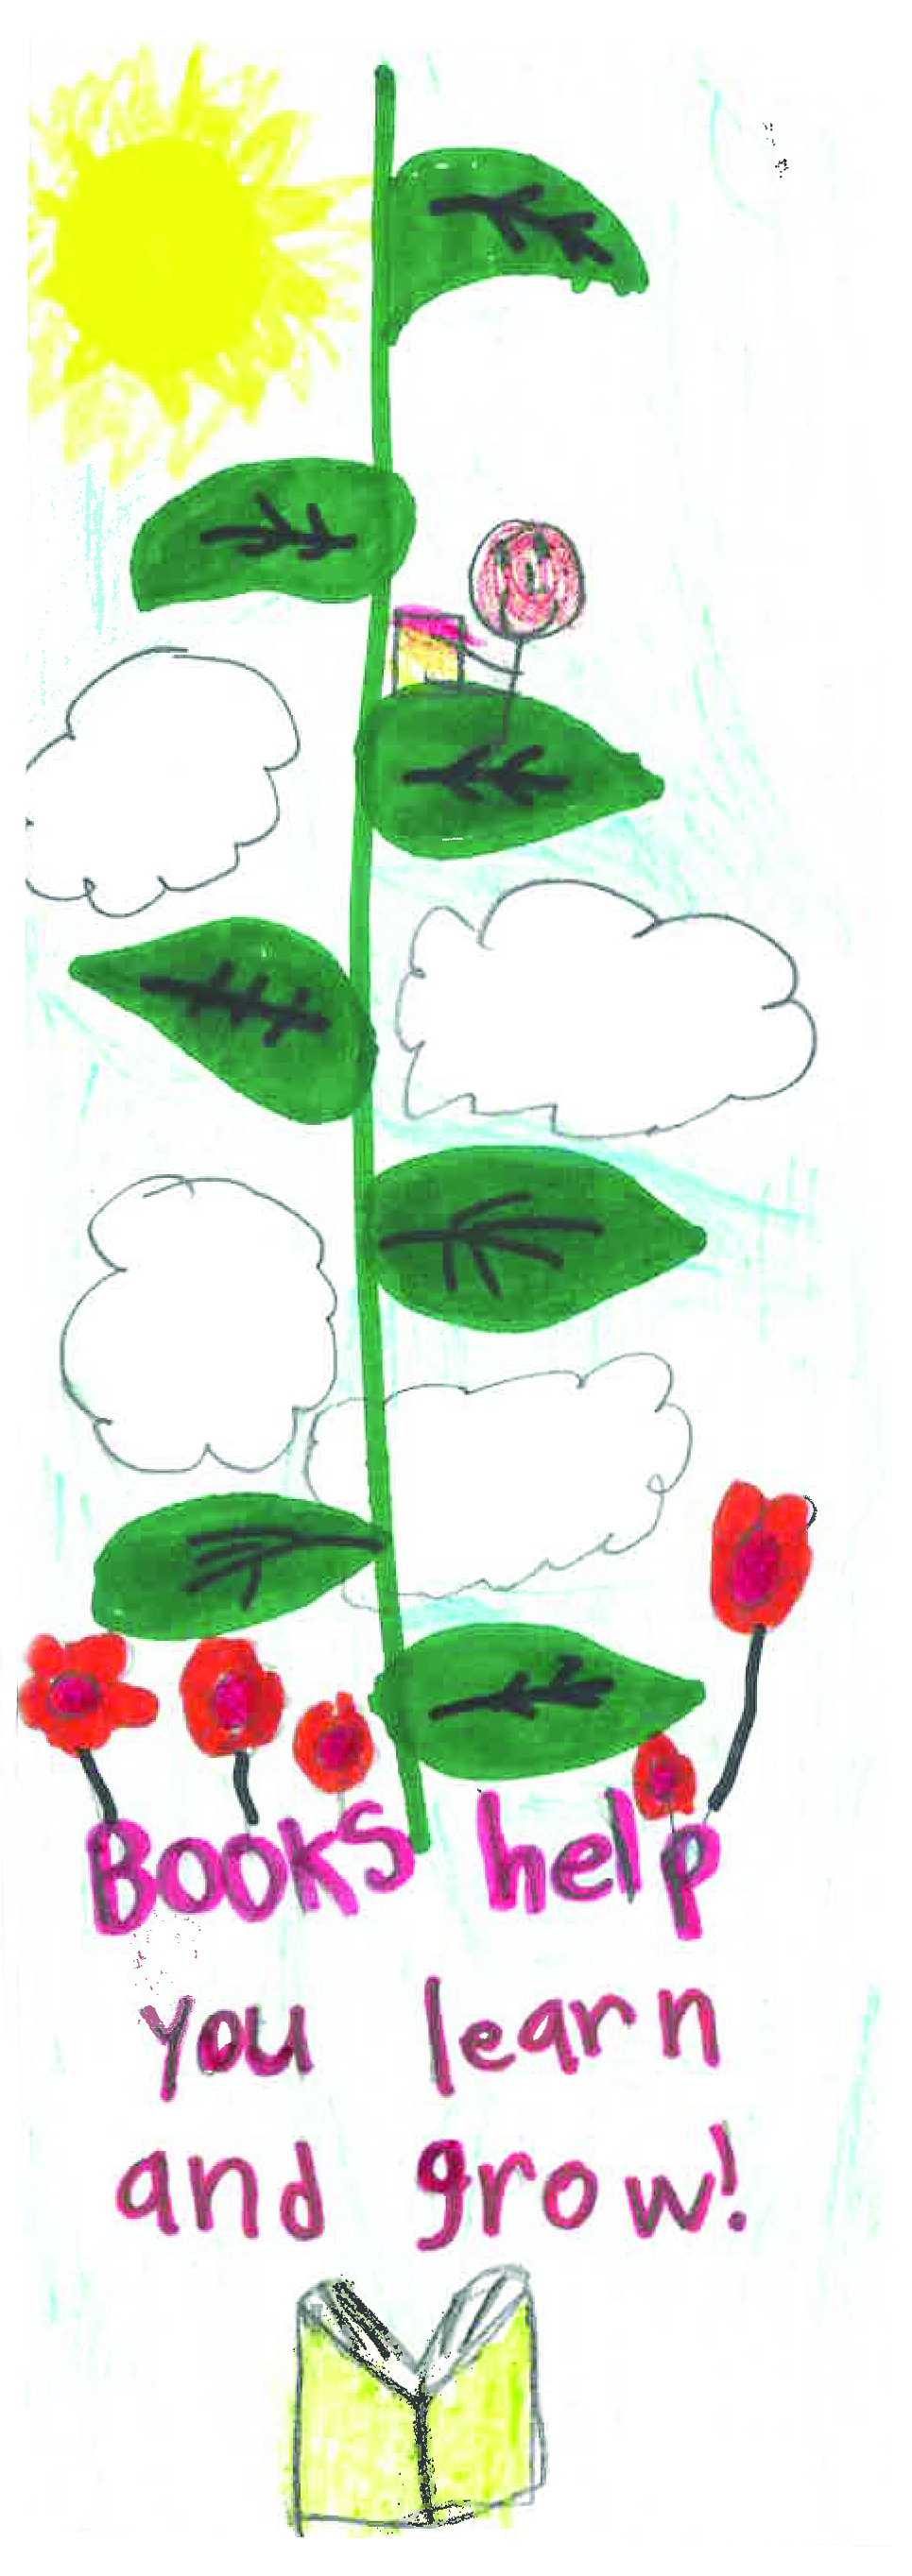 July 2020 Bookmark contest illustration showing flowers and a vine reaching up into the sky with the words "Books help you learn and grow"